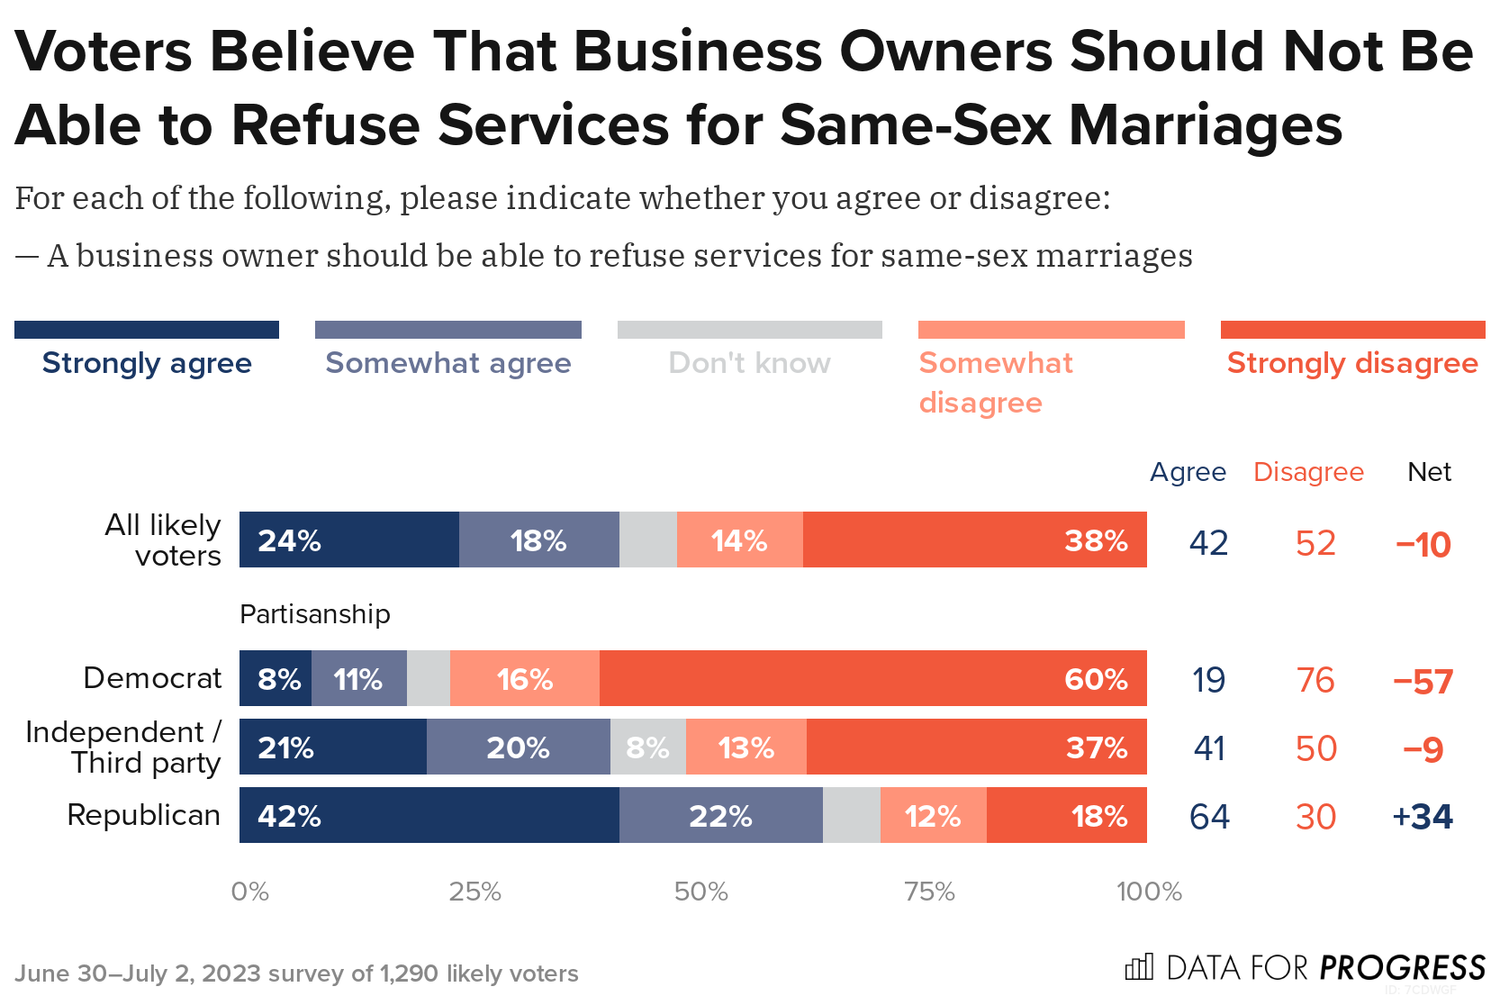 Large Majority Of Voters Say Business Owners Should Not Be Able To Deny Services Based On